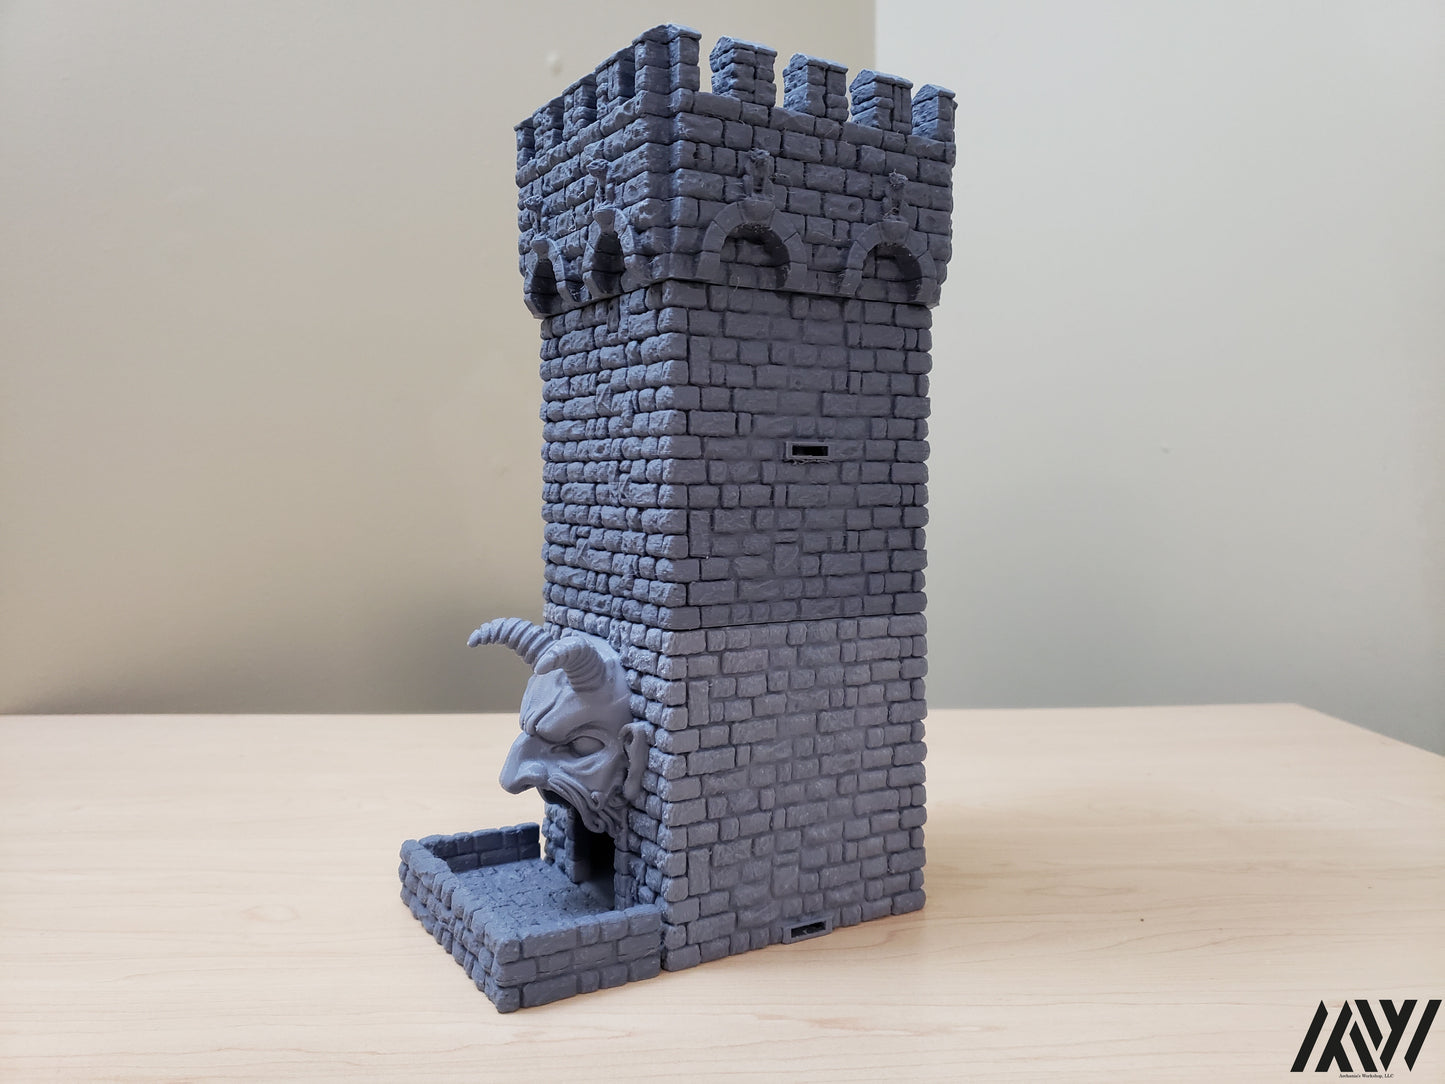 Demon Faced Dice Tower